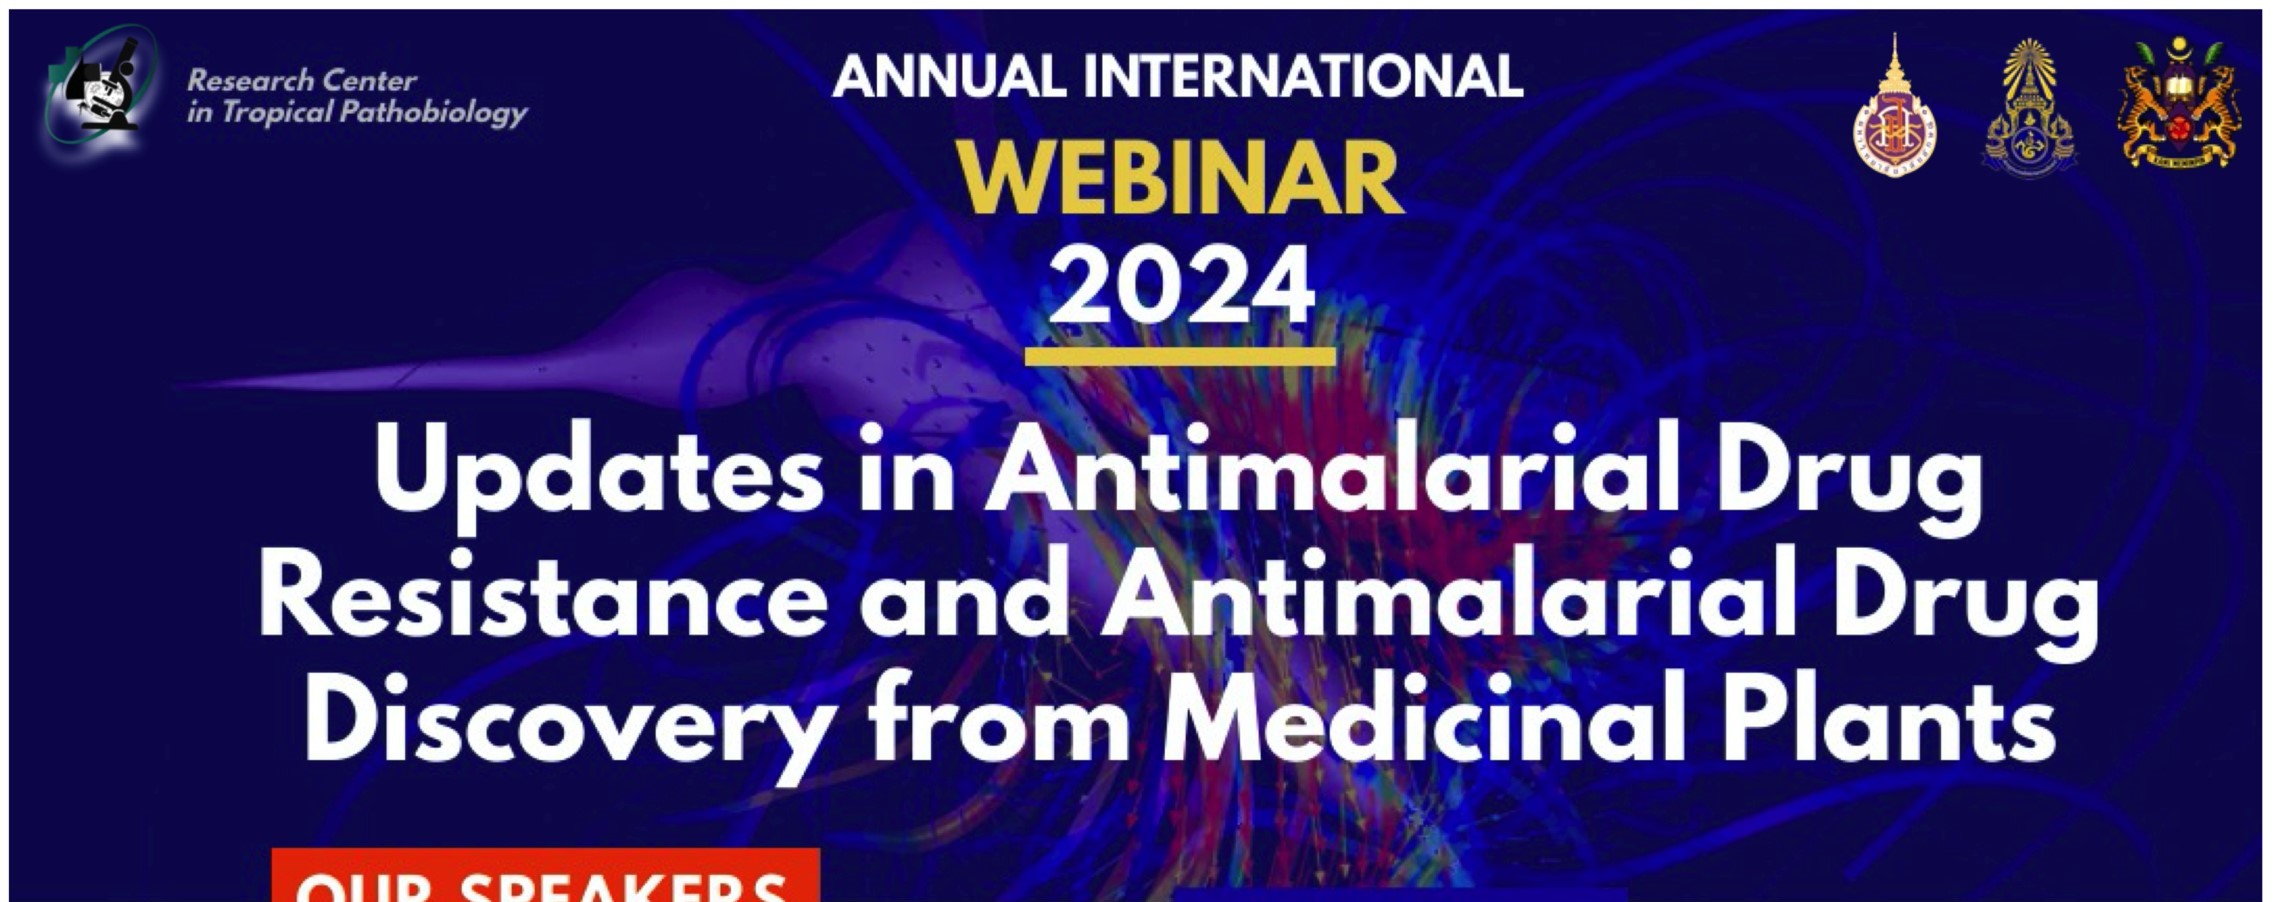 Updates in Antimalarial Drug Resistance and Antimalarial Drug Discovery fo - head